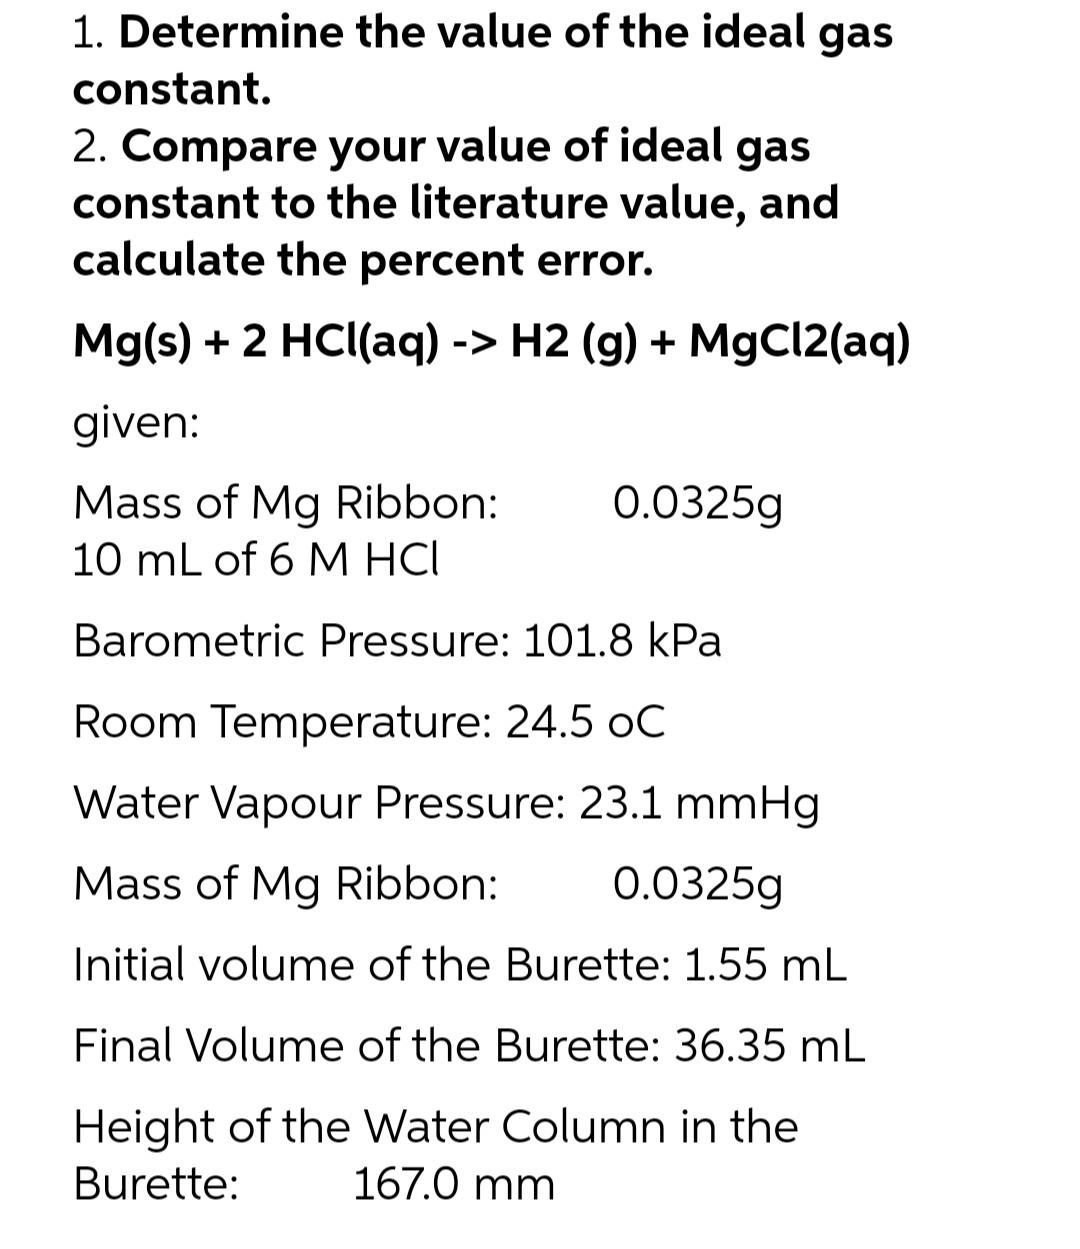 1. Determine the value of the ideal gas
constant.
2. Compare your value of ideal gas
constant to the literature value, and
calculate the percent error.
Mg(s) + 2 HCl(aq) -> H2 (g) + MgCI2(aq)
given:
0.0325g
Mass of Mg Ribbon:
10 mL of 6 M HCI
Barometric Pressure: 101.8 kPa
Room Temperature: 24.5 oC
Water Vapour Pressure: 23.1 mmHg
Mass of Mg Ribbon:
0.0325g
Initial volume of the Burette: 1.55 mL
Final Volume of the Burette: 36.35 mL
Height of the Water Column in the
167.0 mm
Burette:
